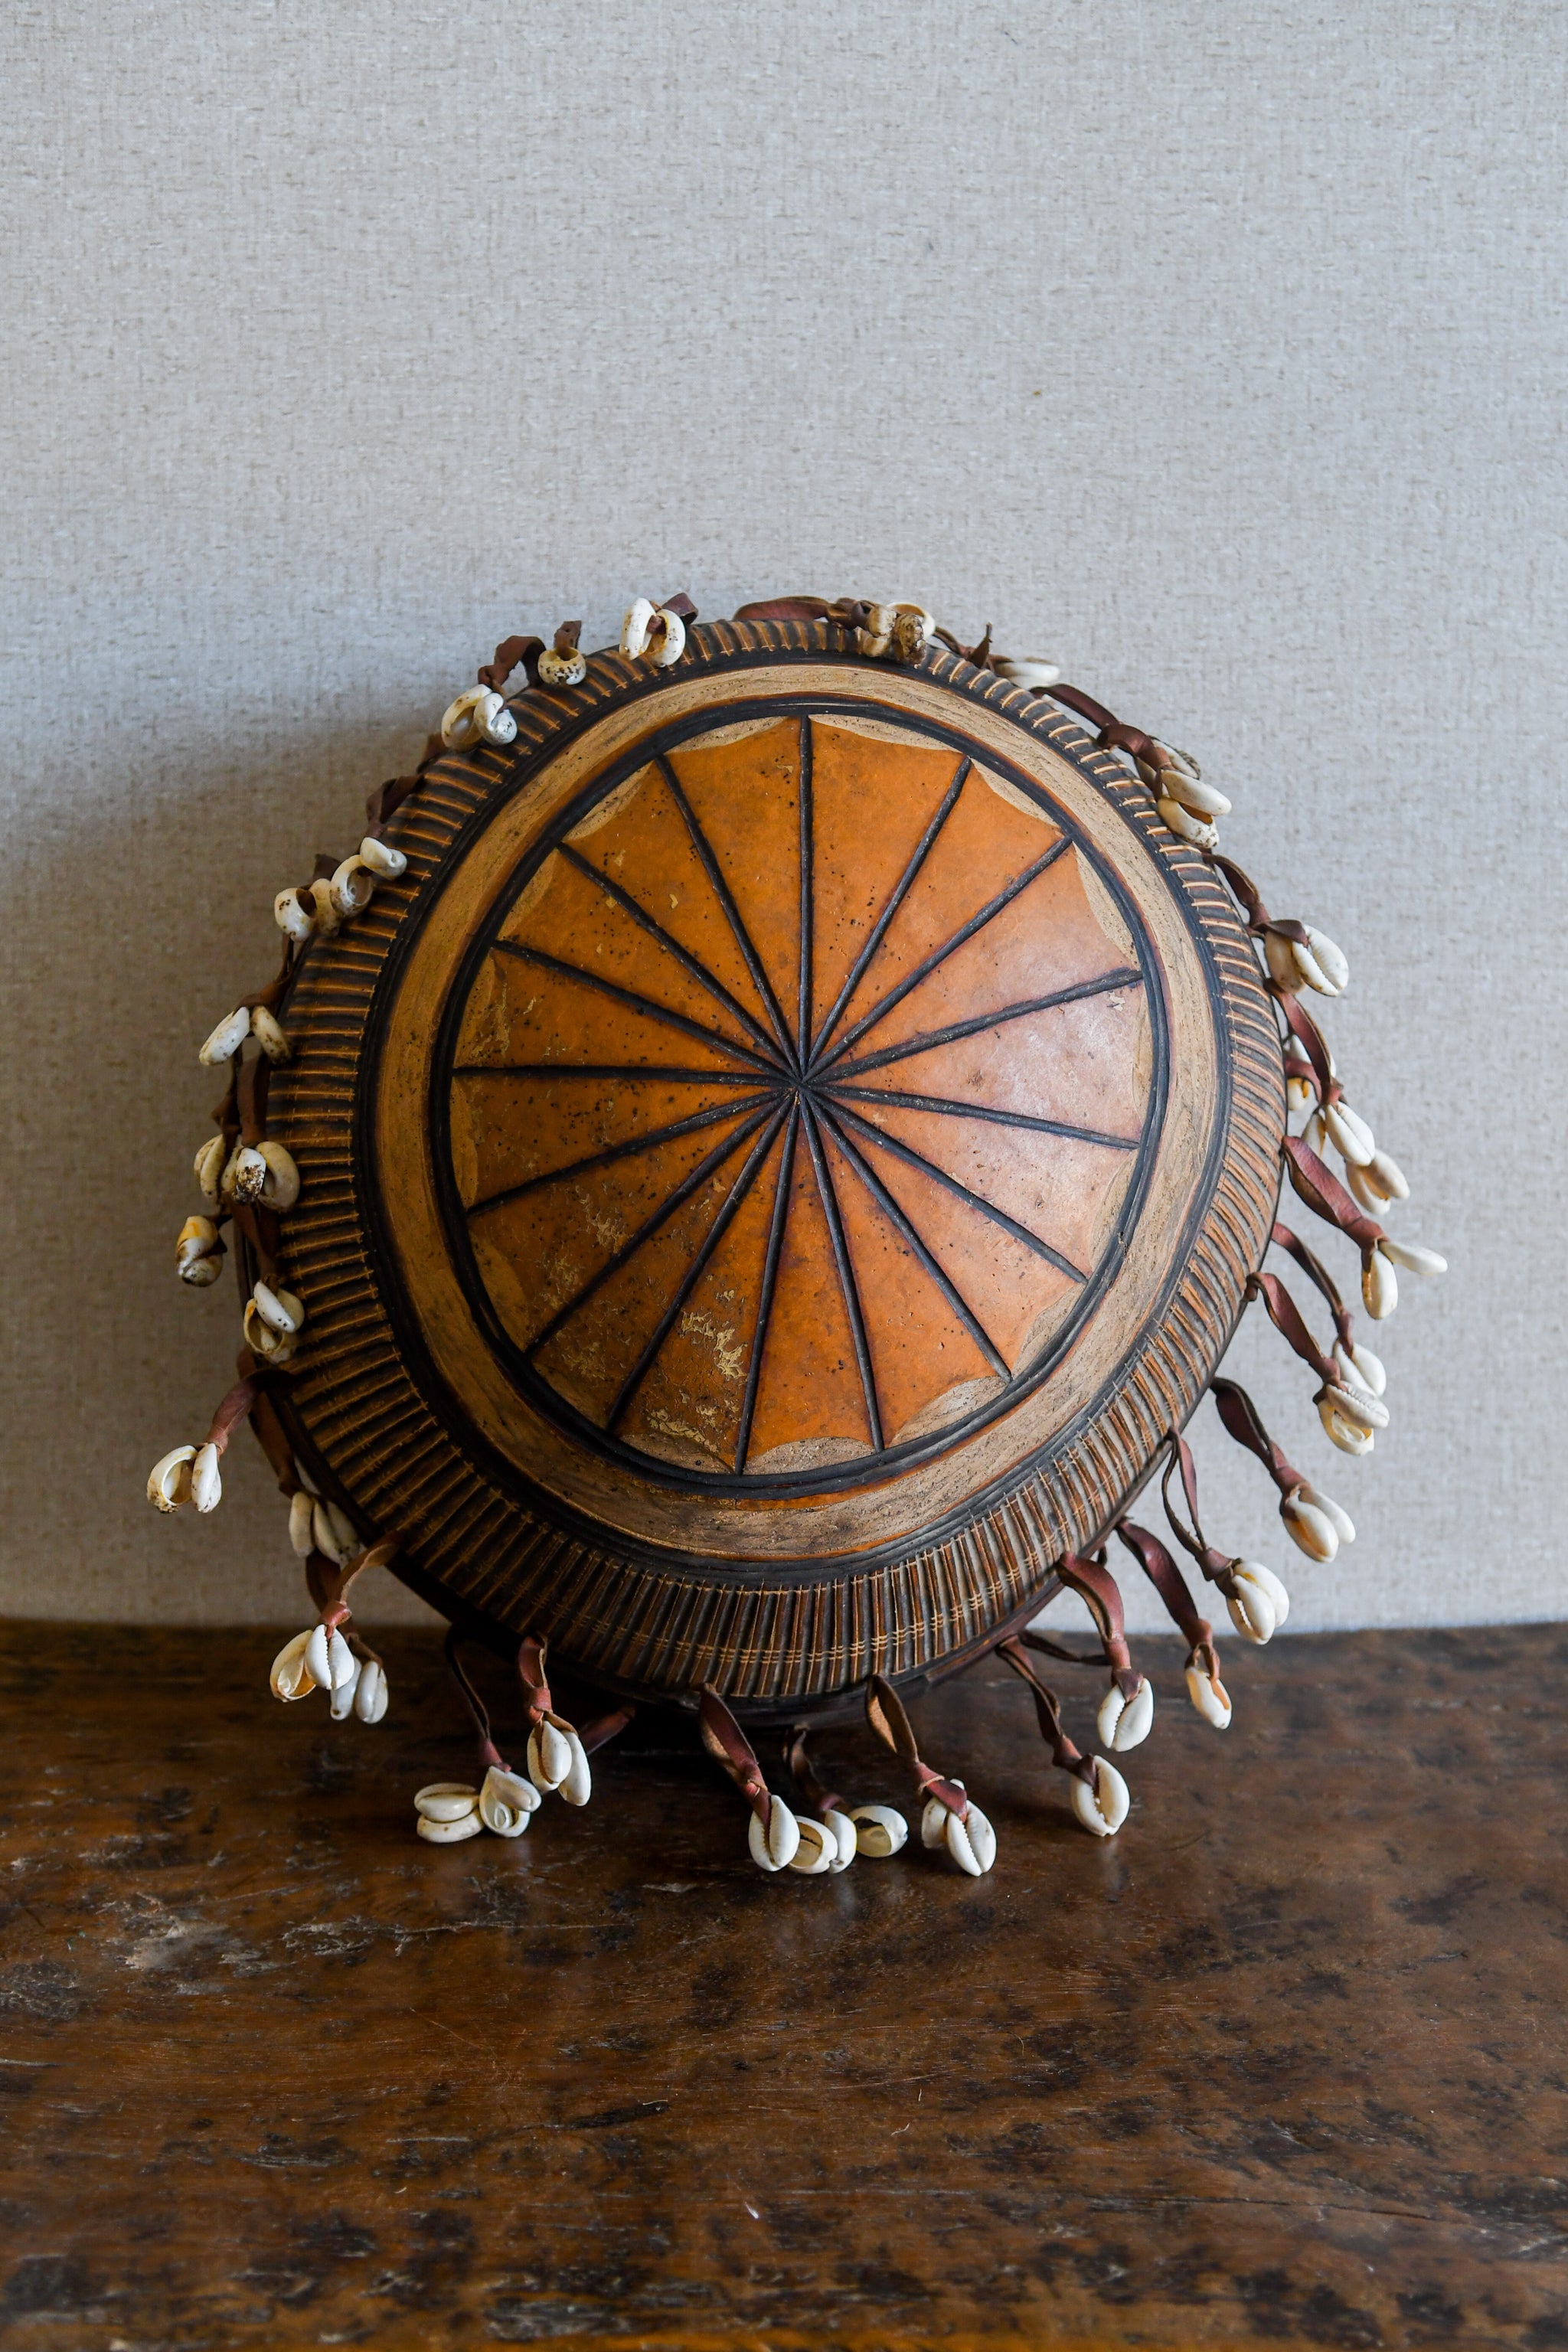 Tribal Objects - Artwork - African - Folk Art - Artifacts - Calabash Bowl - Vessel - Cowrie Shell - Sculpture - Collectible